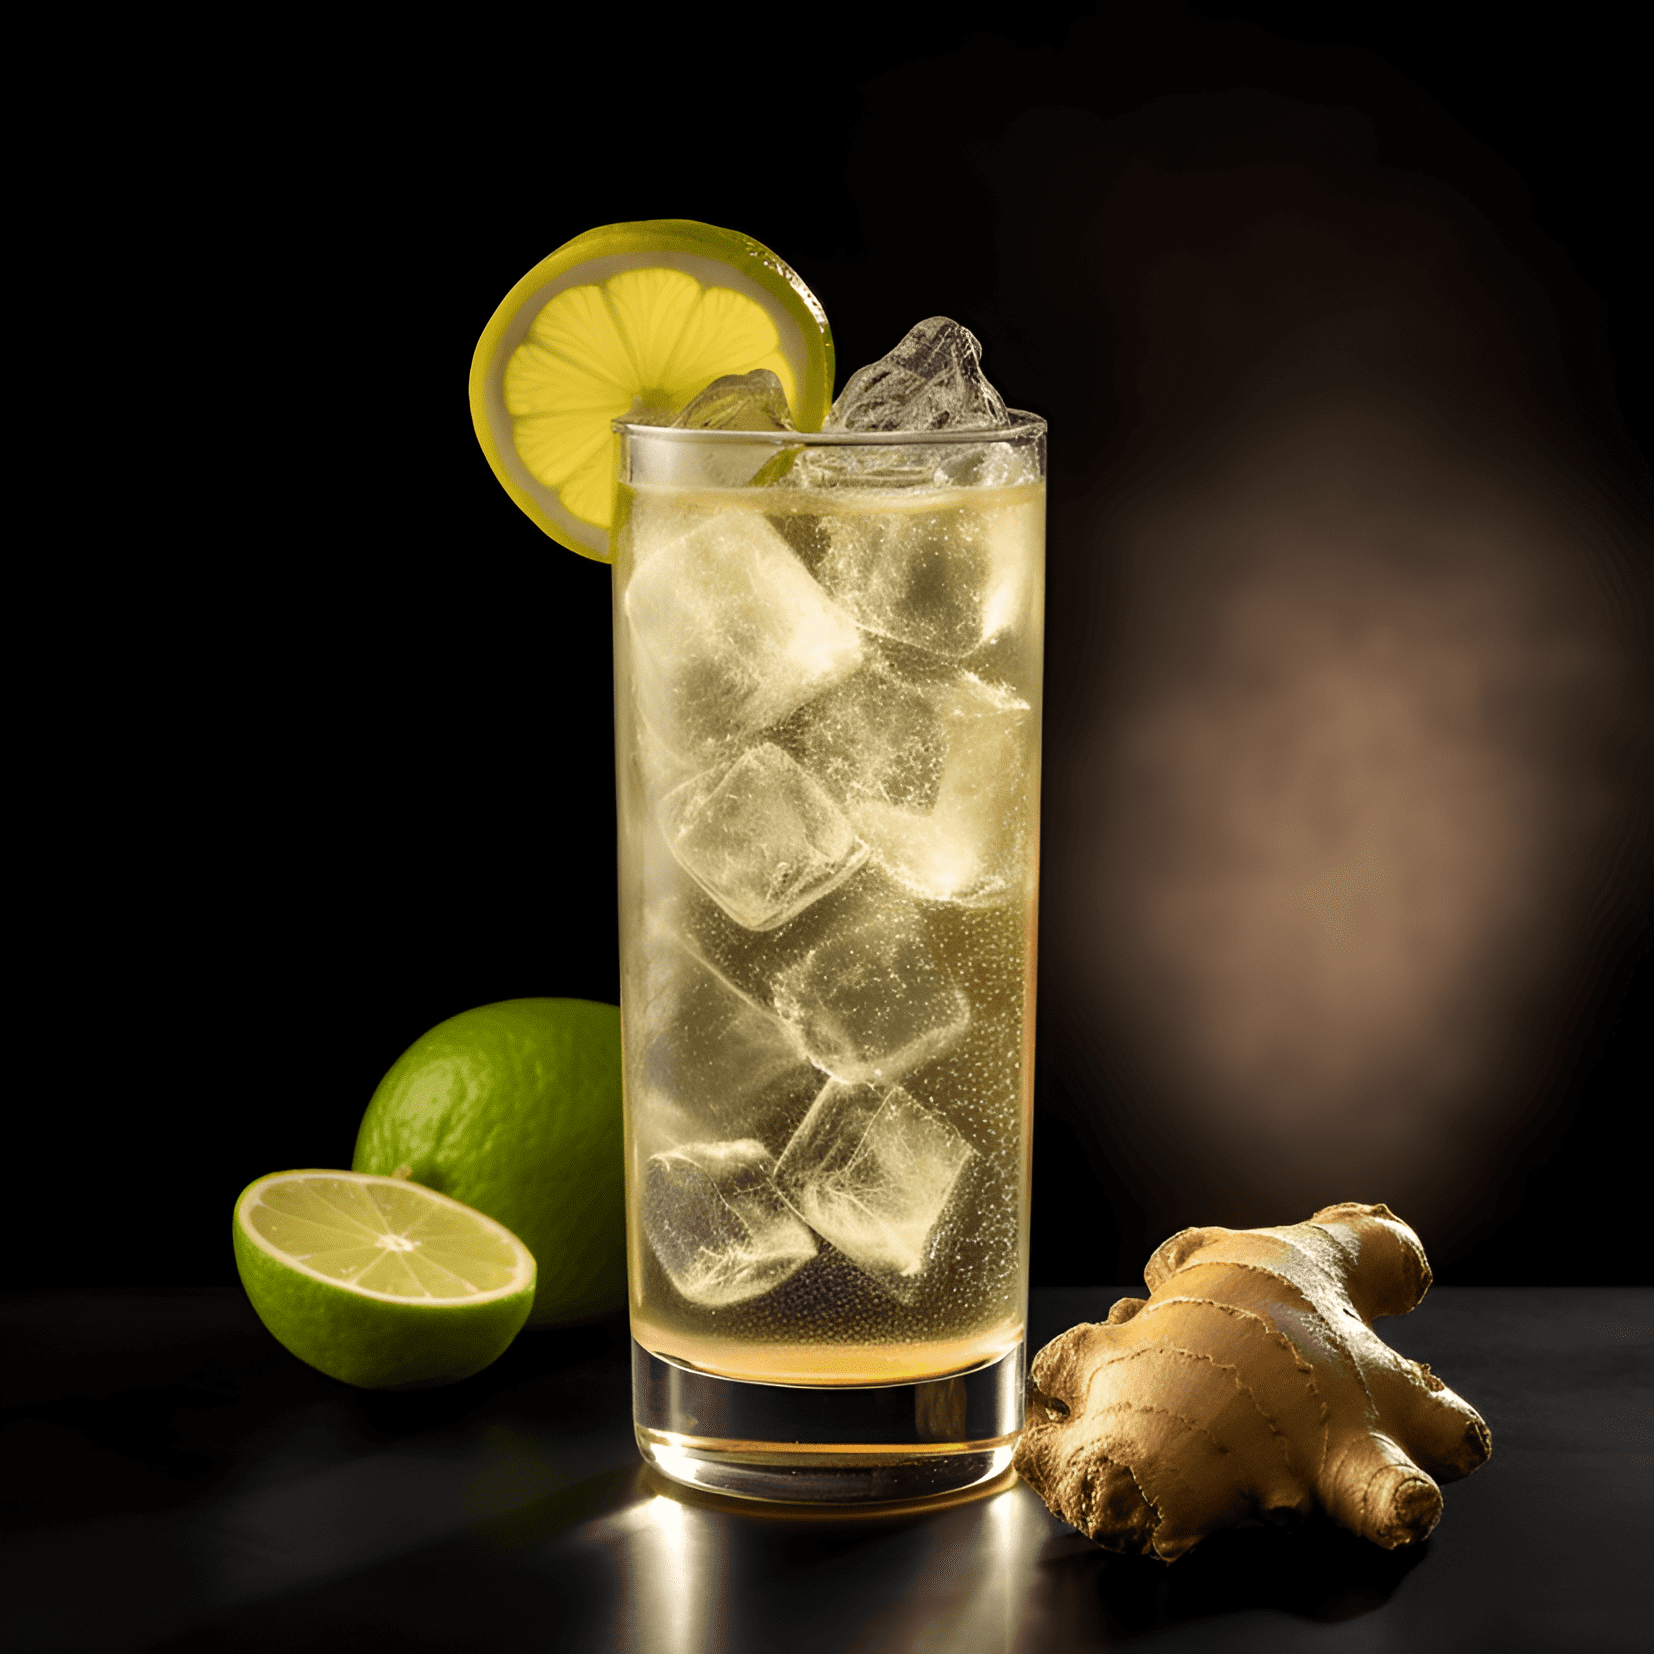 Ginger Highball Cocktail Recipe - The Ginger Highball has a well-balanced taste that is both sweet and spicy. The whiskey provides a warm, rich flavor, while the ginger ale adds a refreshing, effervescent kick. The combination of flavors creates a light, crisp, and invigorating cocktail.